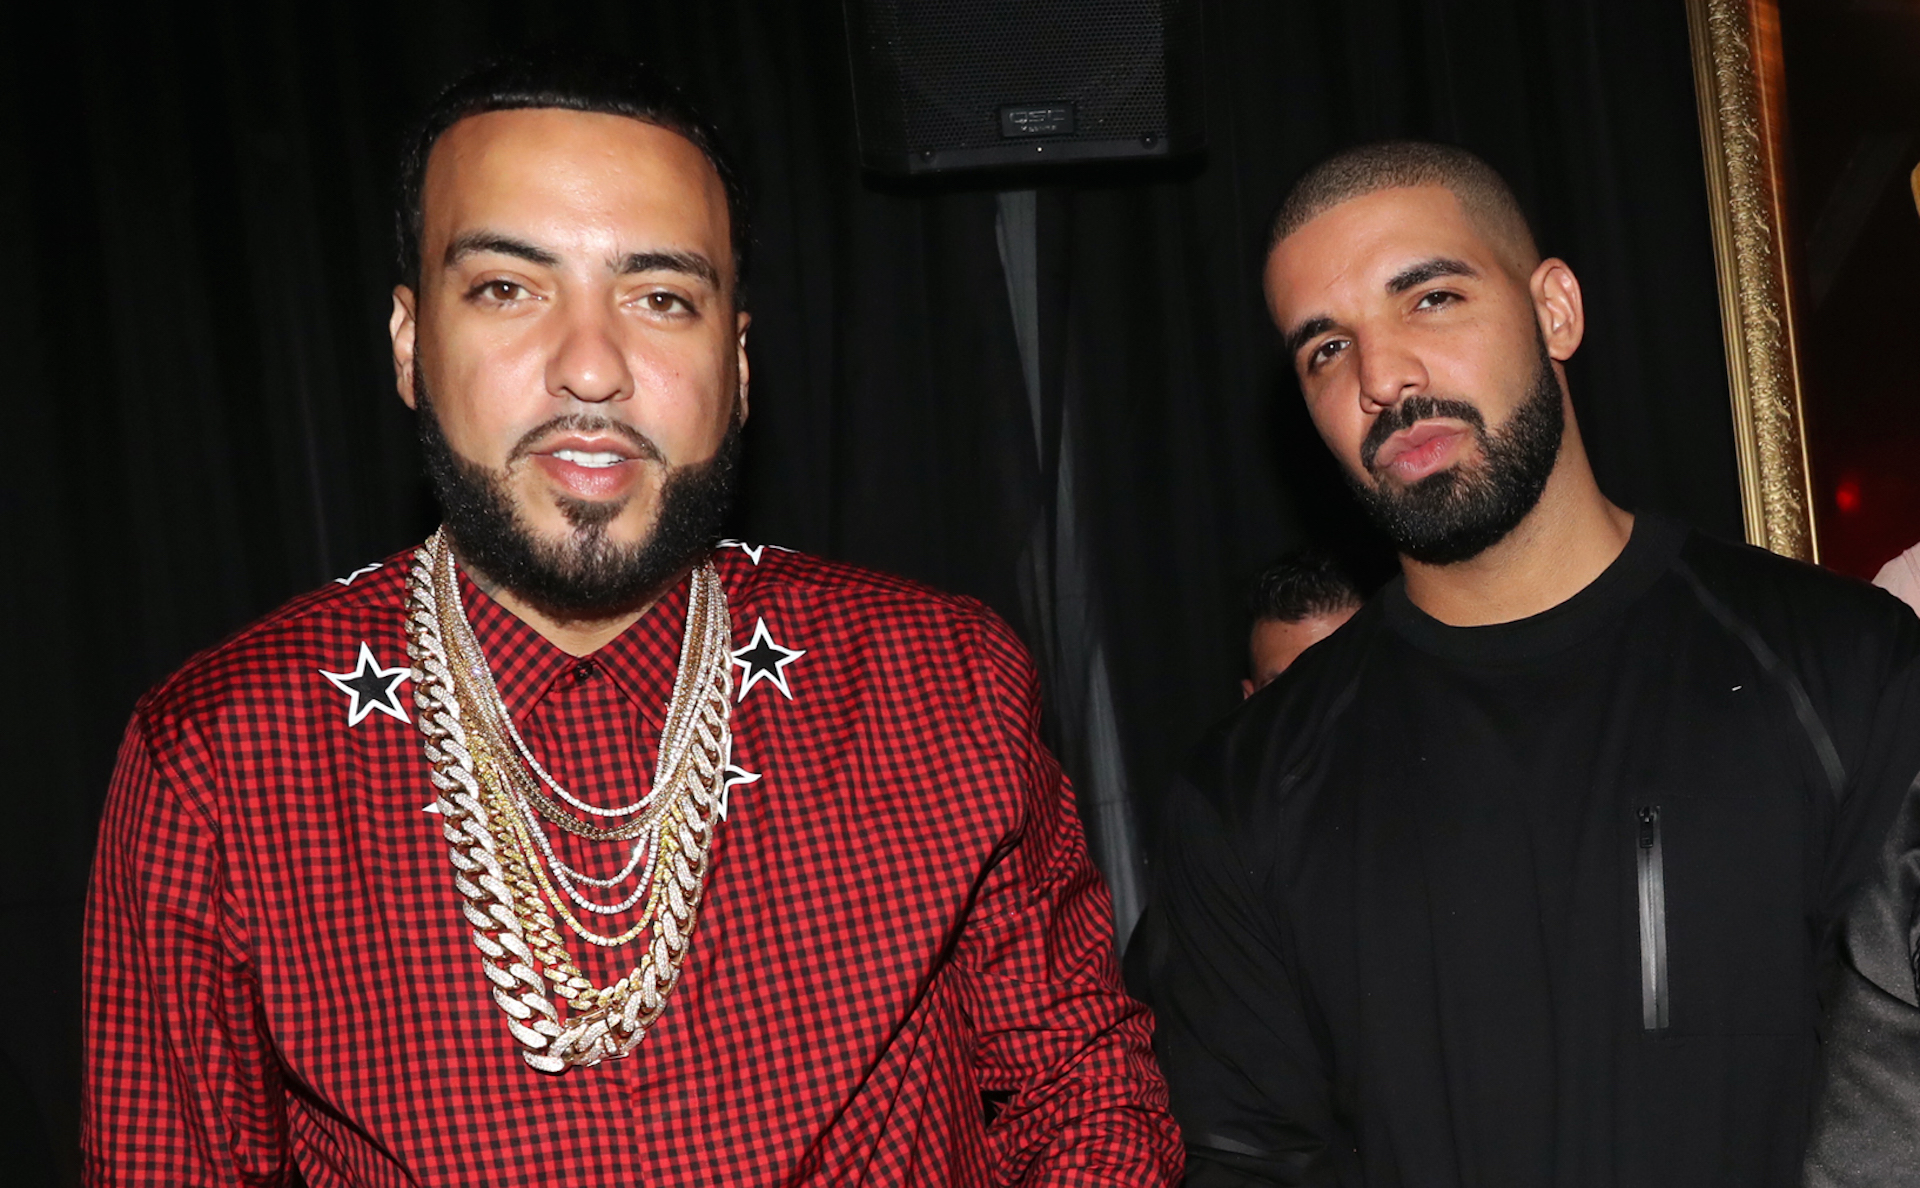 Drake Gives French Montana and Kodak Black’s “Mopstick” Collab and Video Major Co-Sign